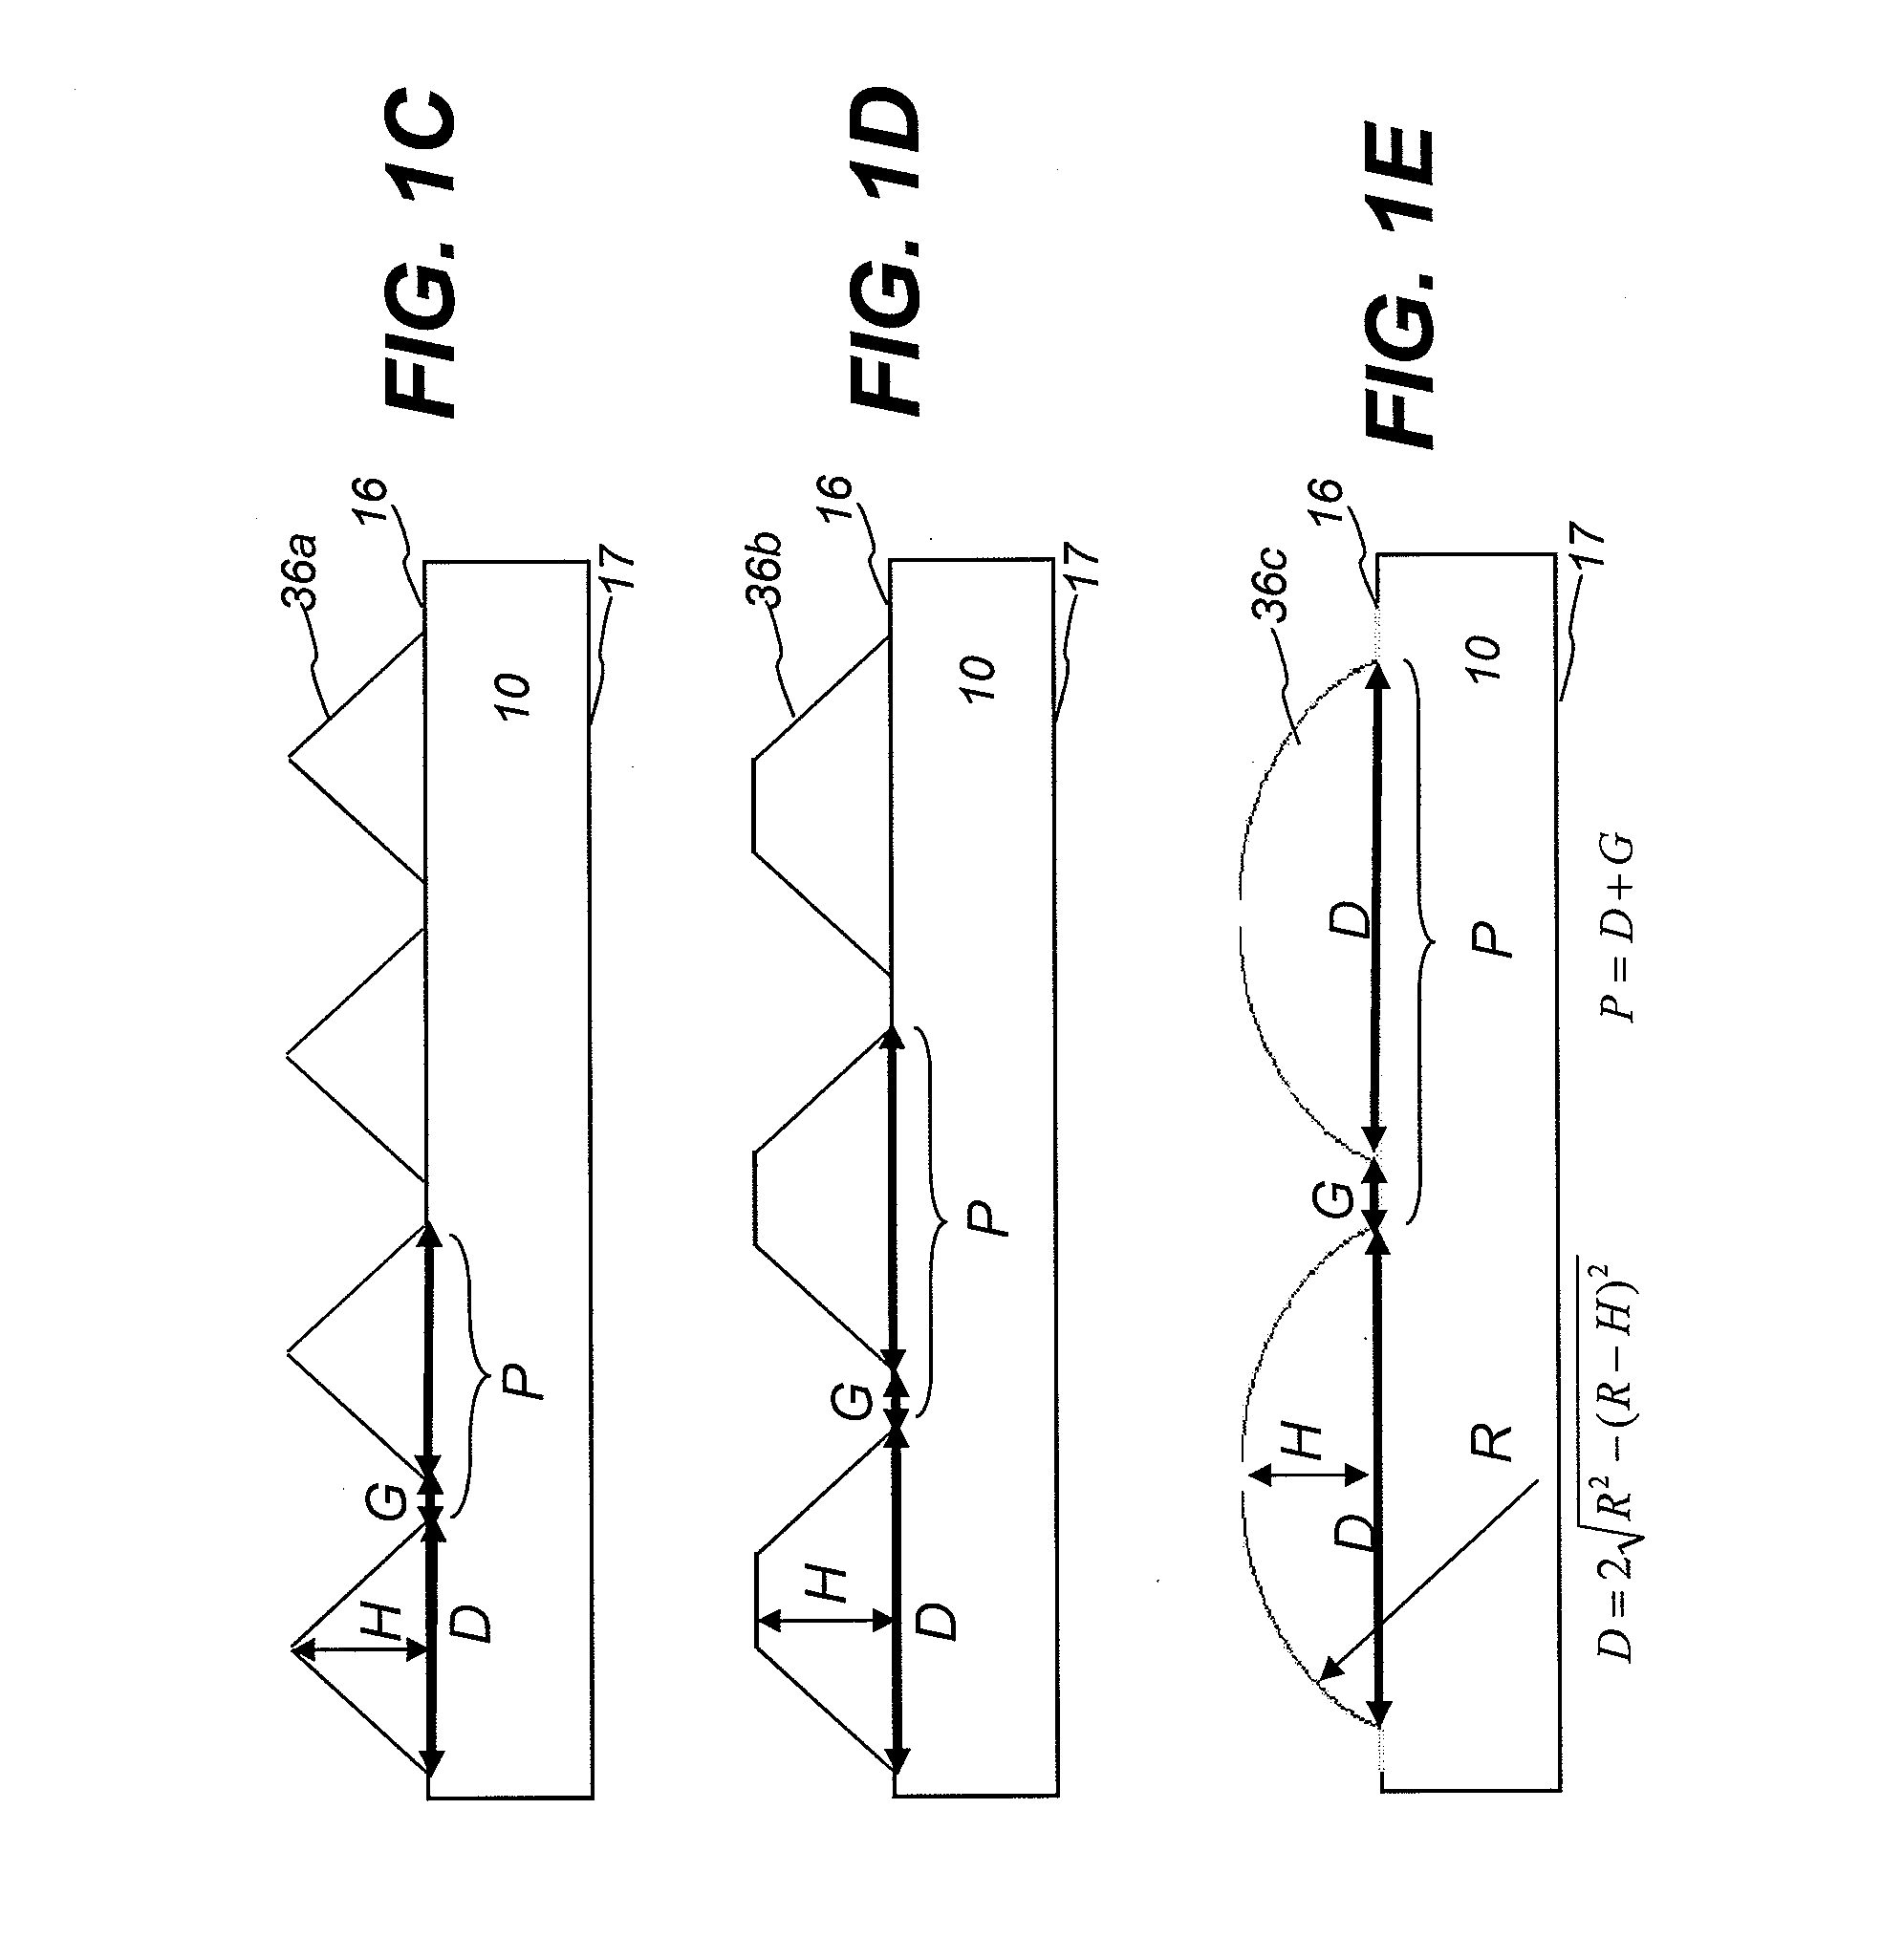 Method for reducing hot spots in a light guide plate utilizing a reversed micro-pattern in its mixing zone